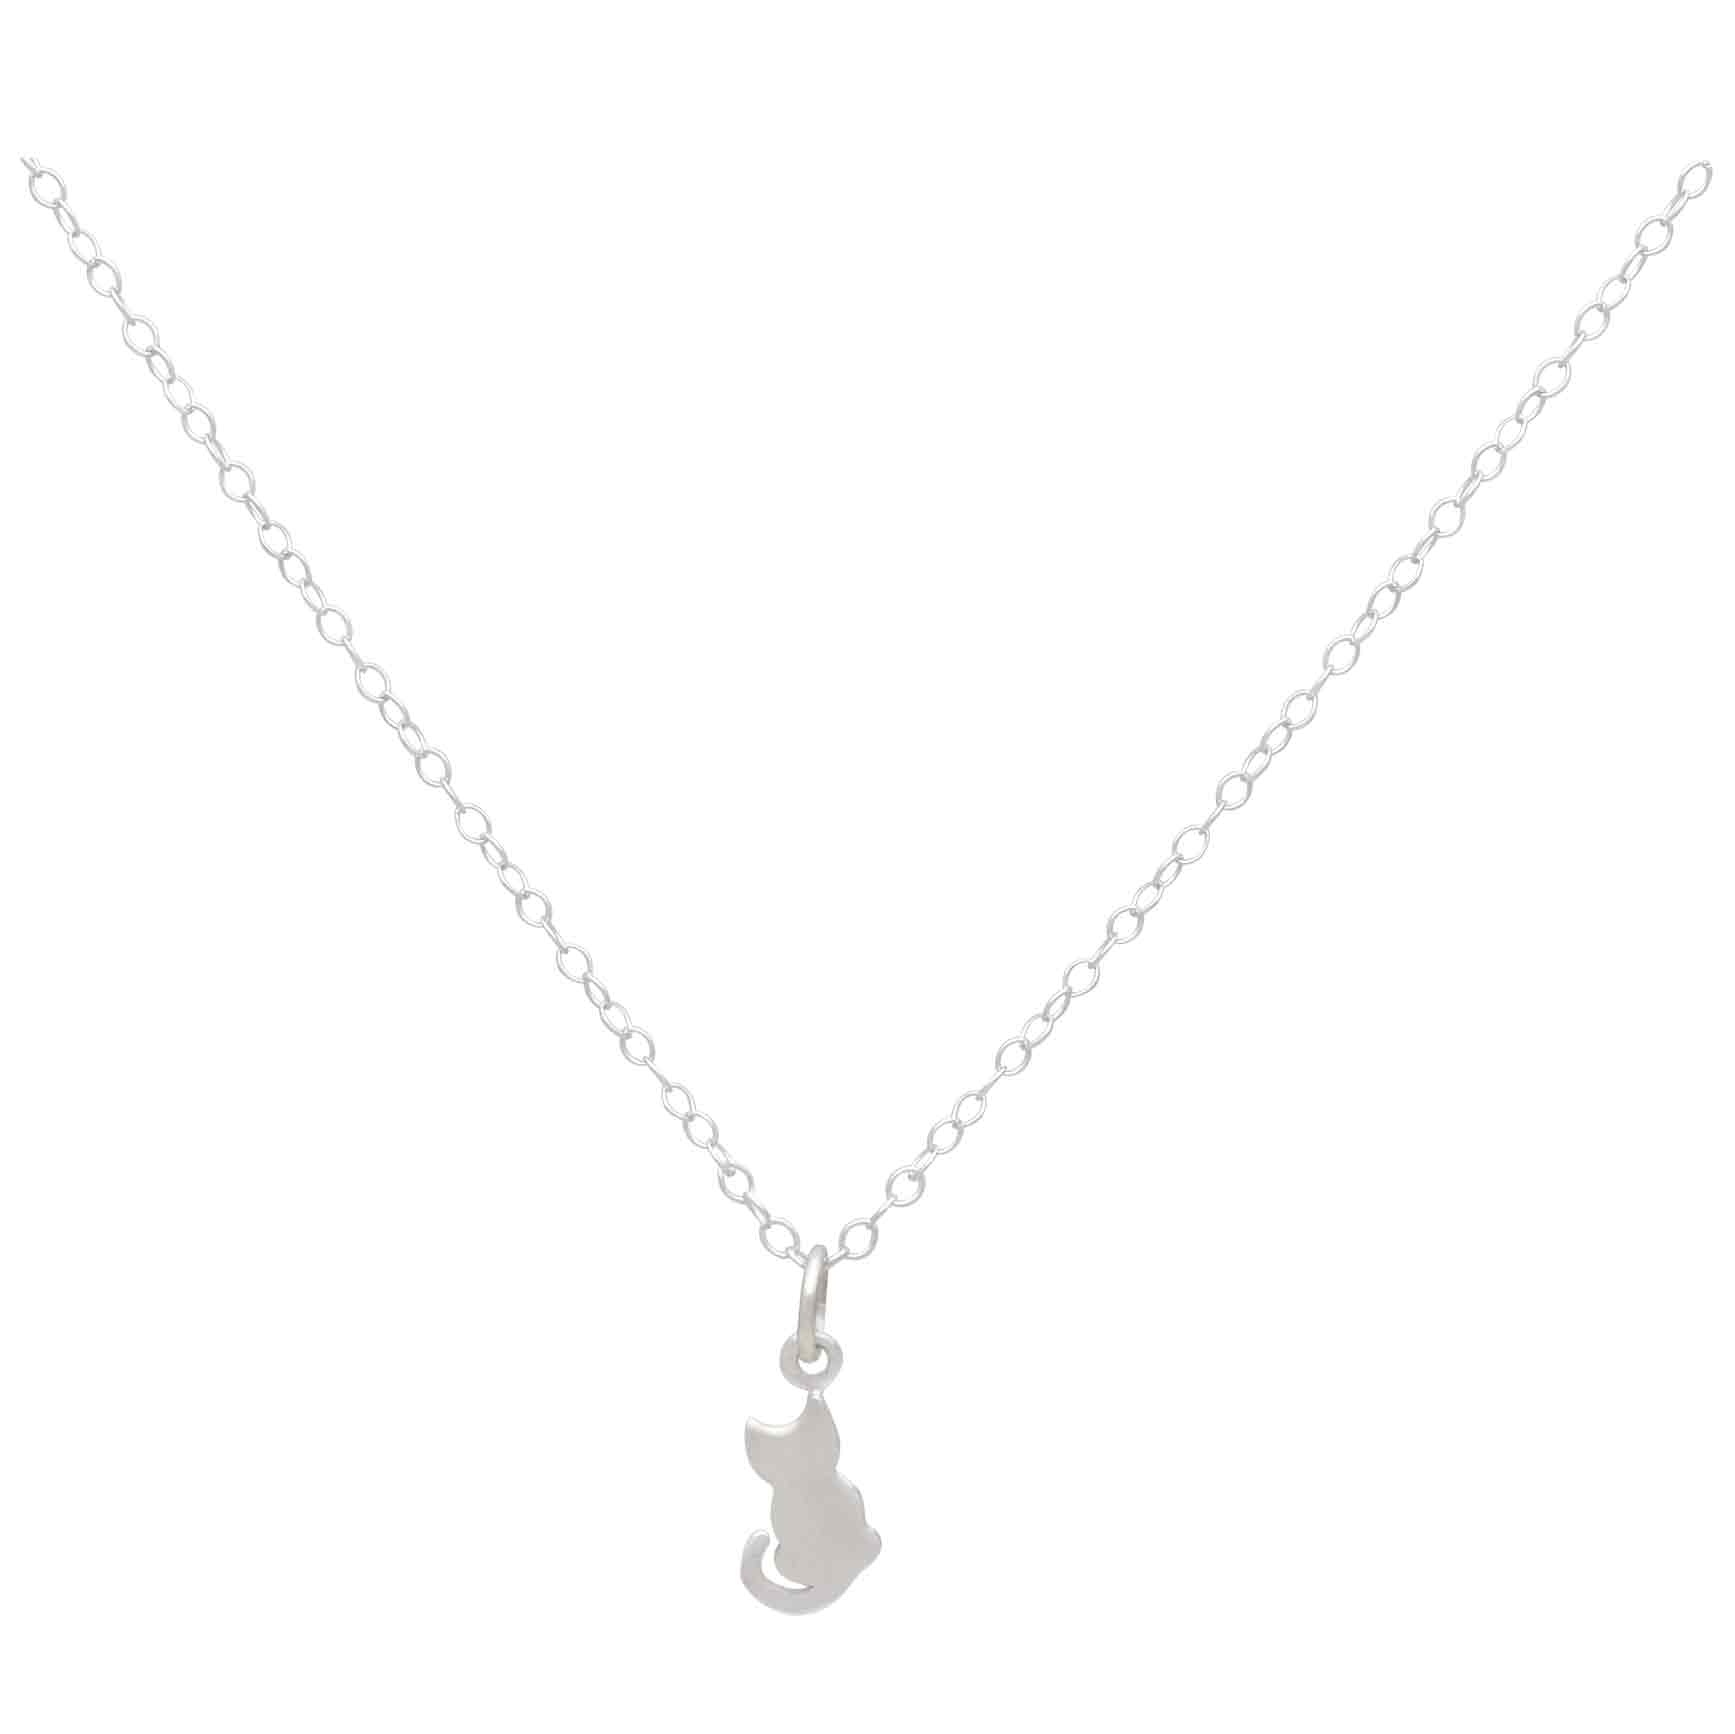 Sterling Silver Tiny Cat Charm Necklace 18 Inch